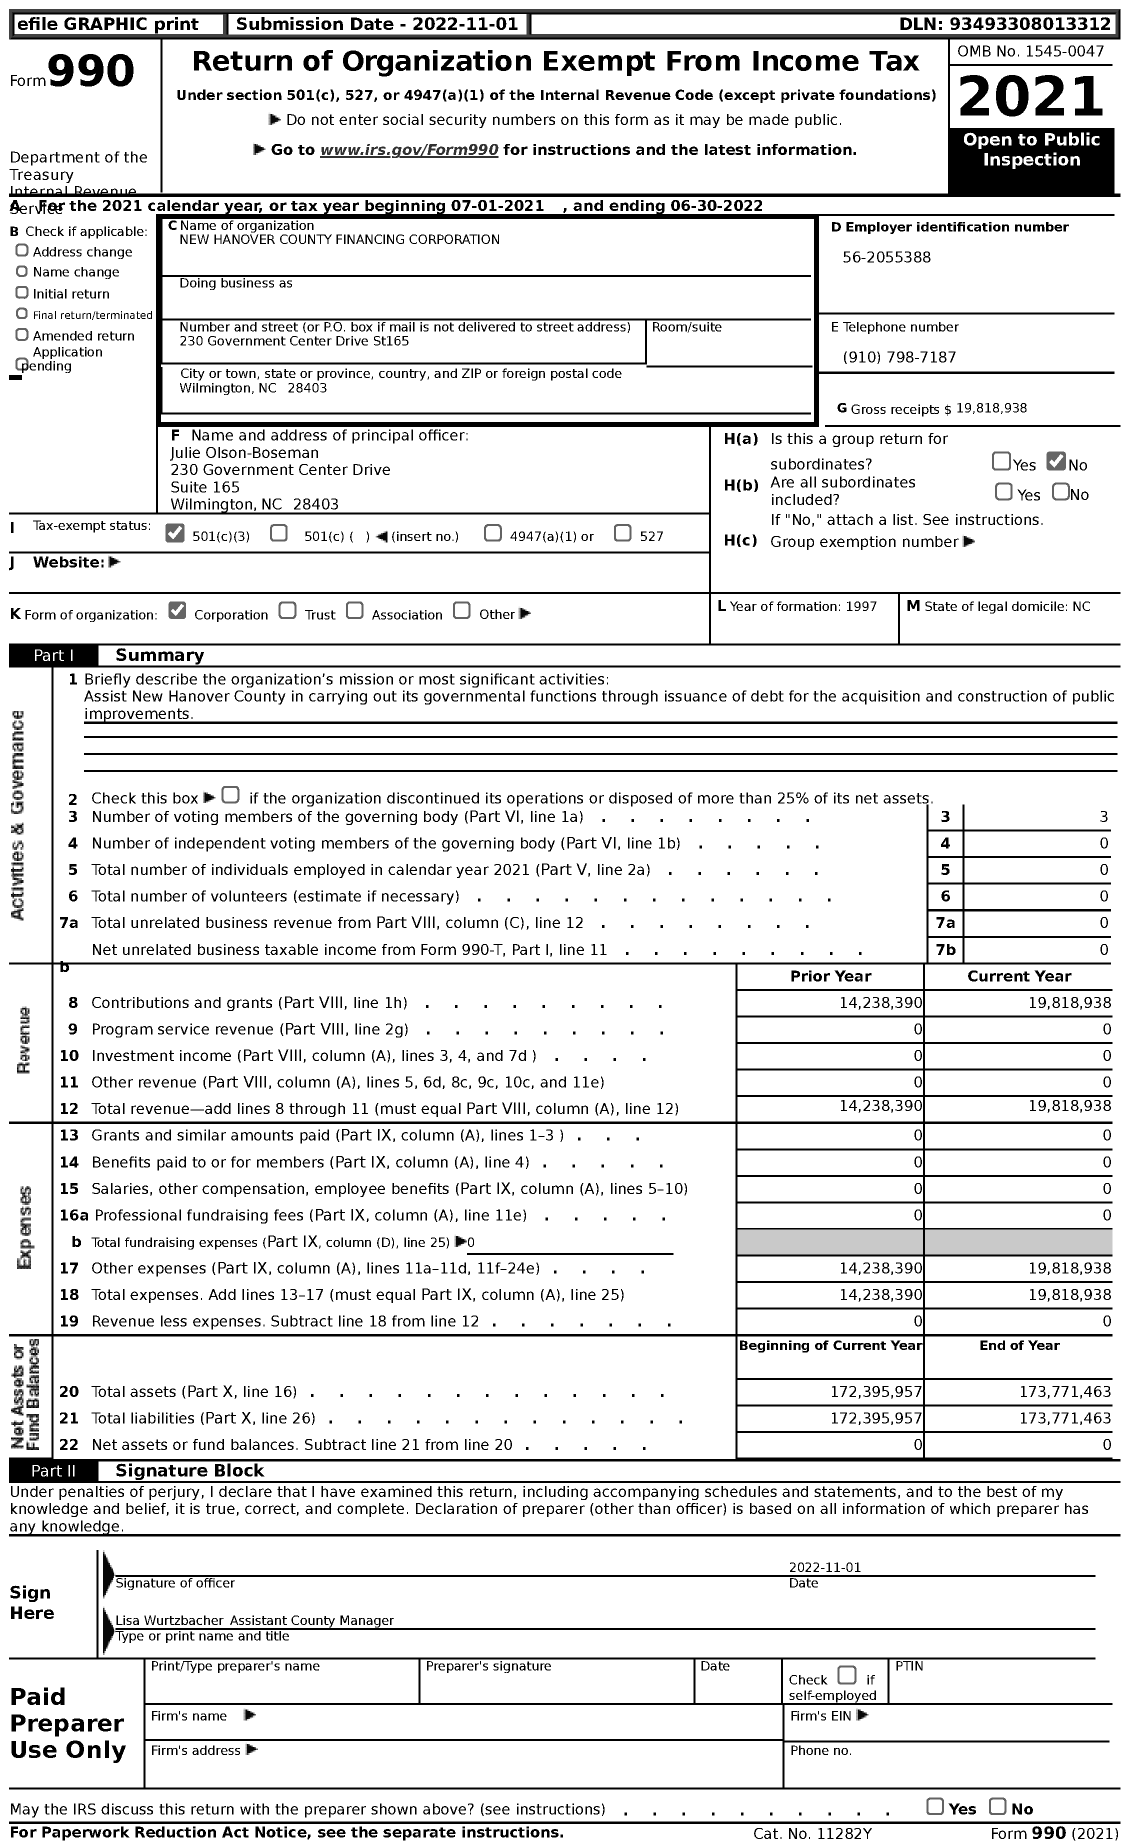 Image of first page of 2021 Form 990 for New Hanover County Financing Corporation